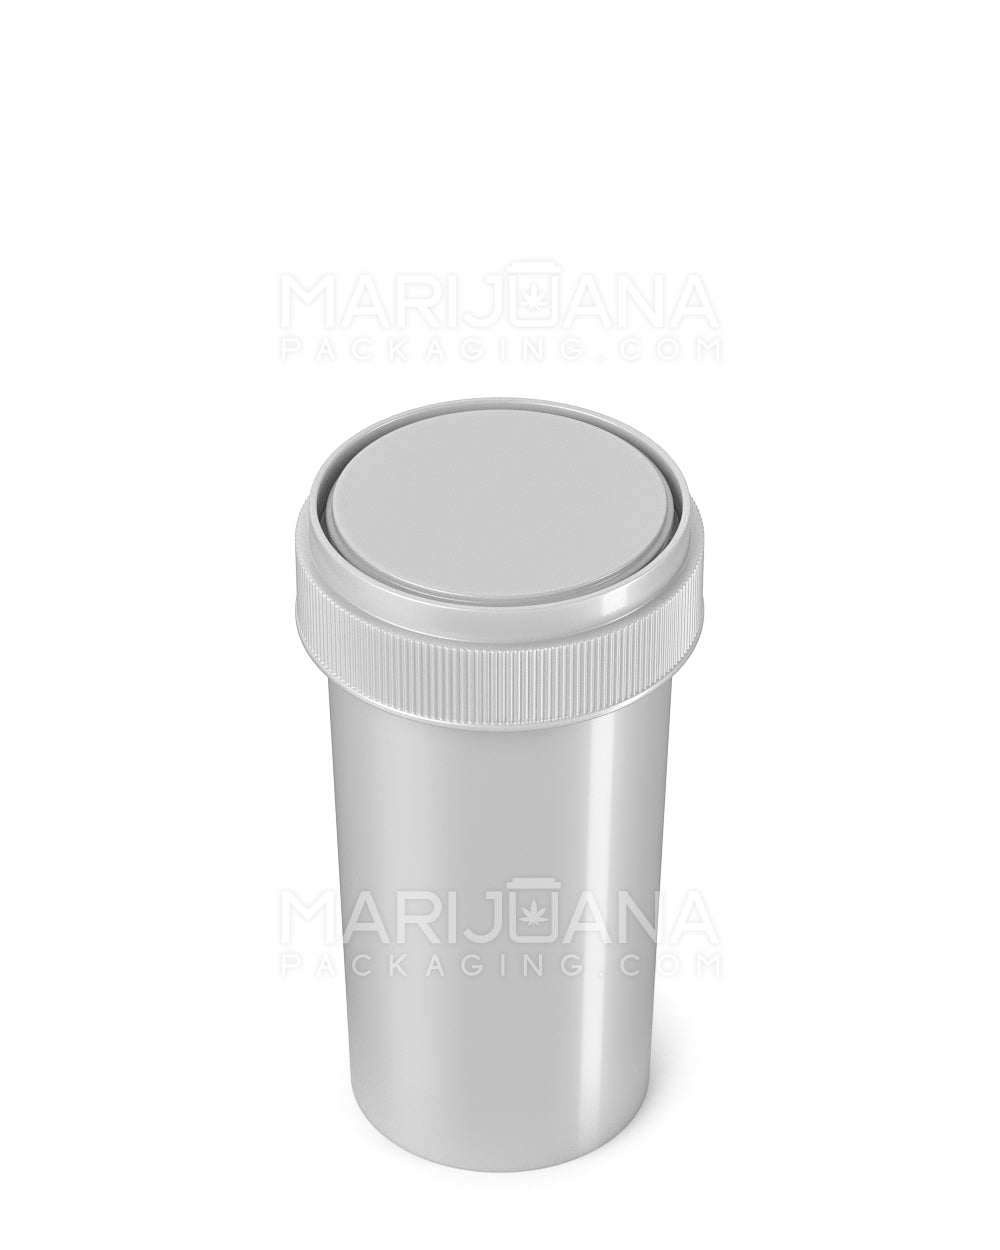 Child Resistant | Opaque Silver Blank Reversible Cap Vials | 40dr - 10g - 150 Count - 4